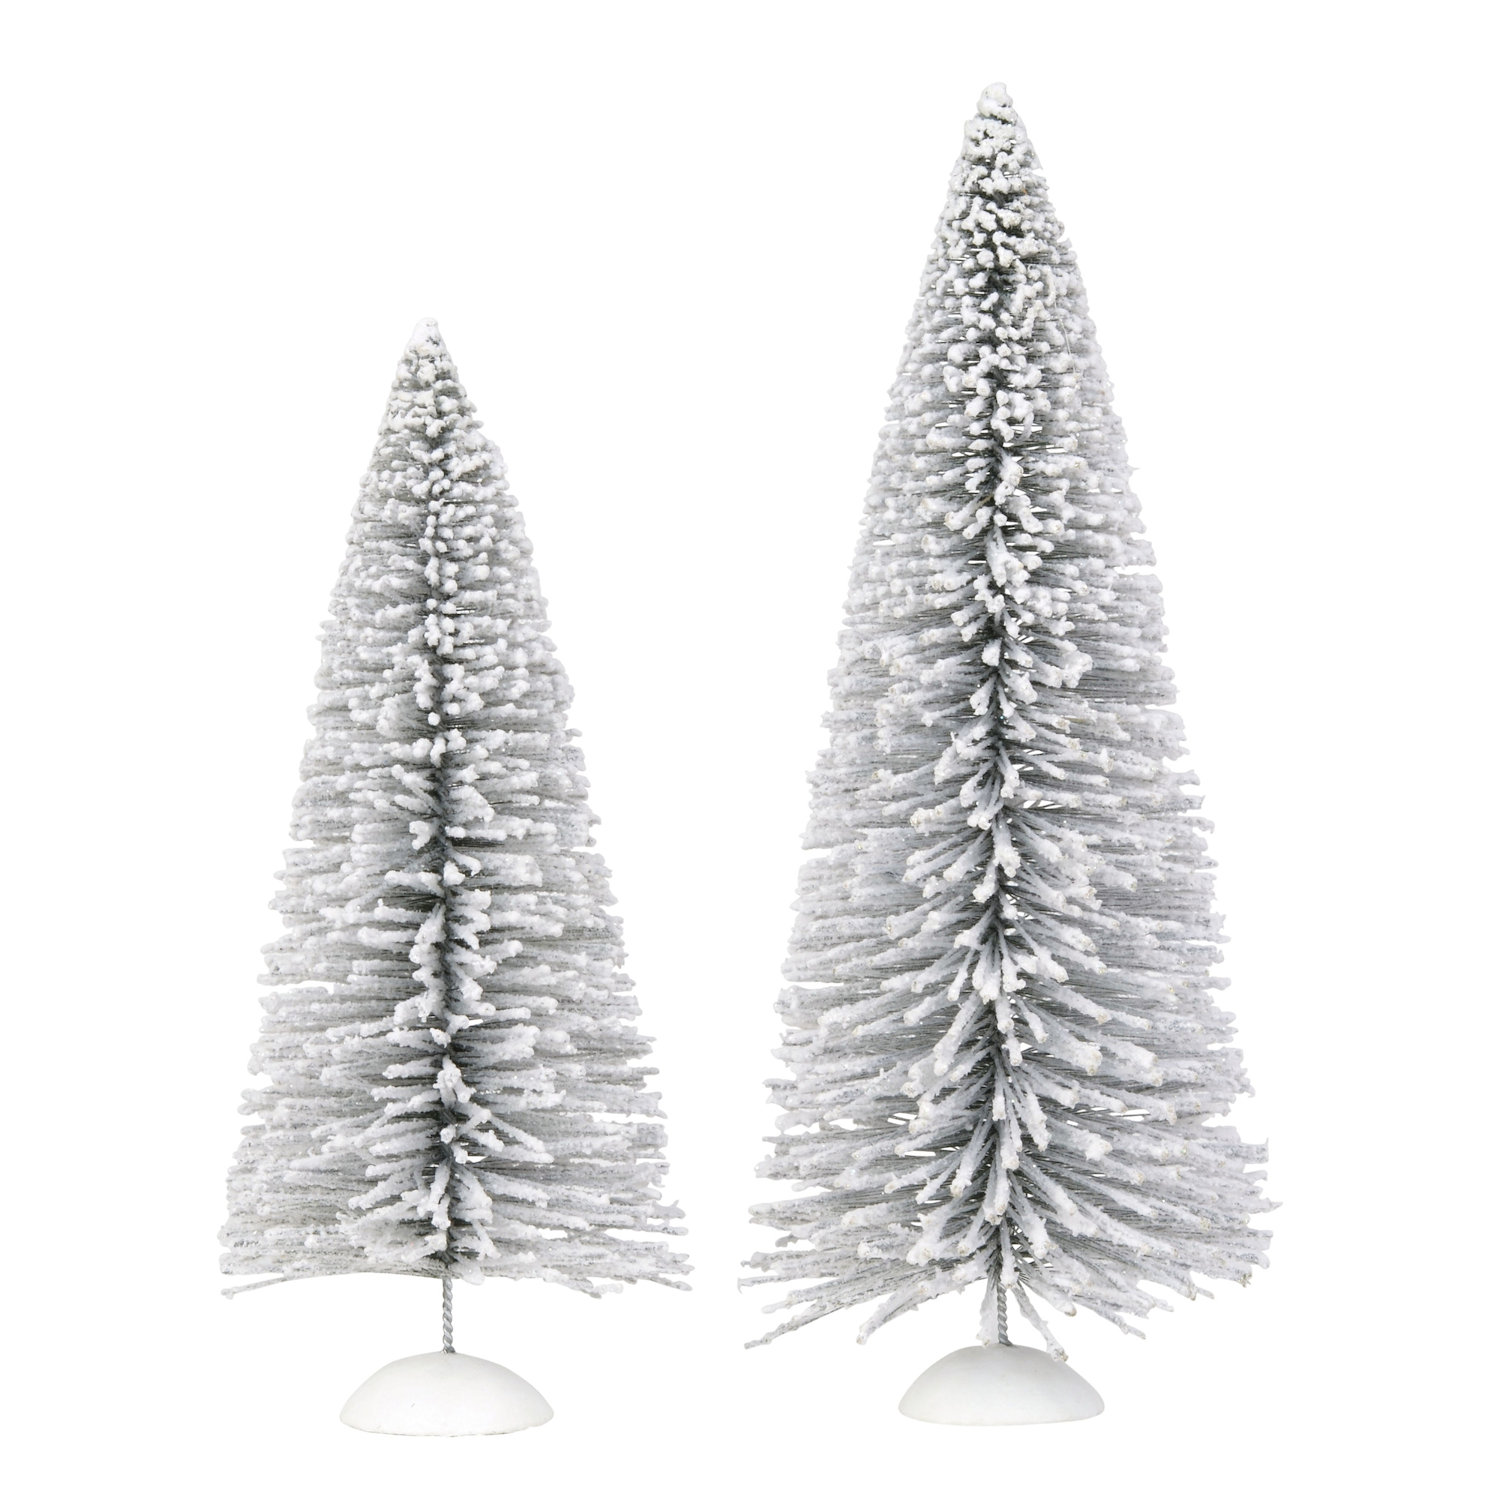 Department 56 Cross Village Product Giant Snow Laden Sisals Trees